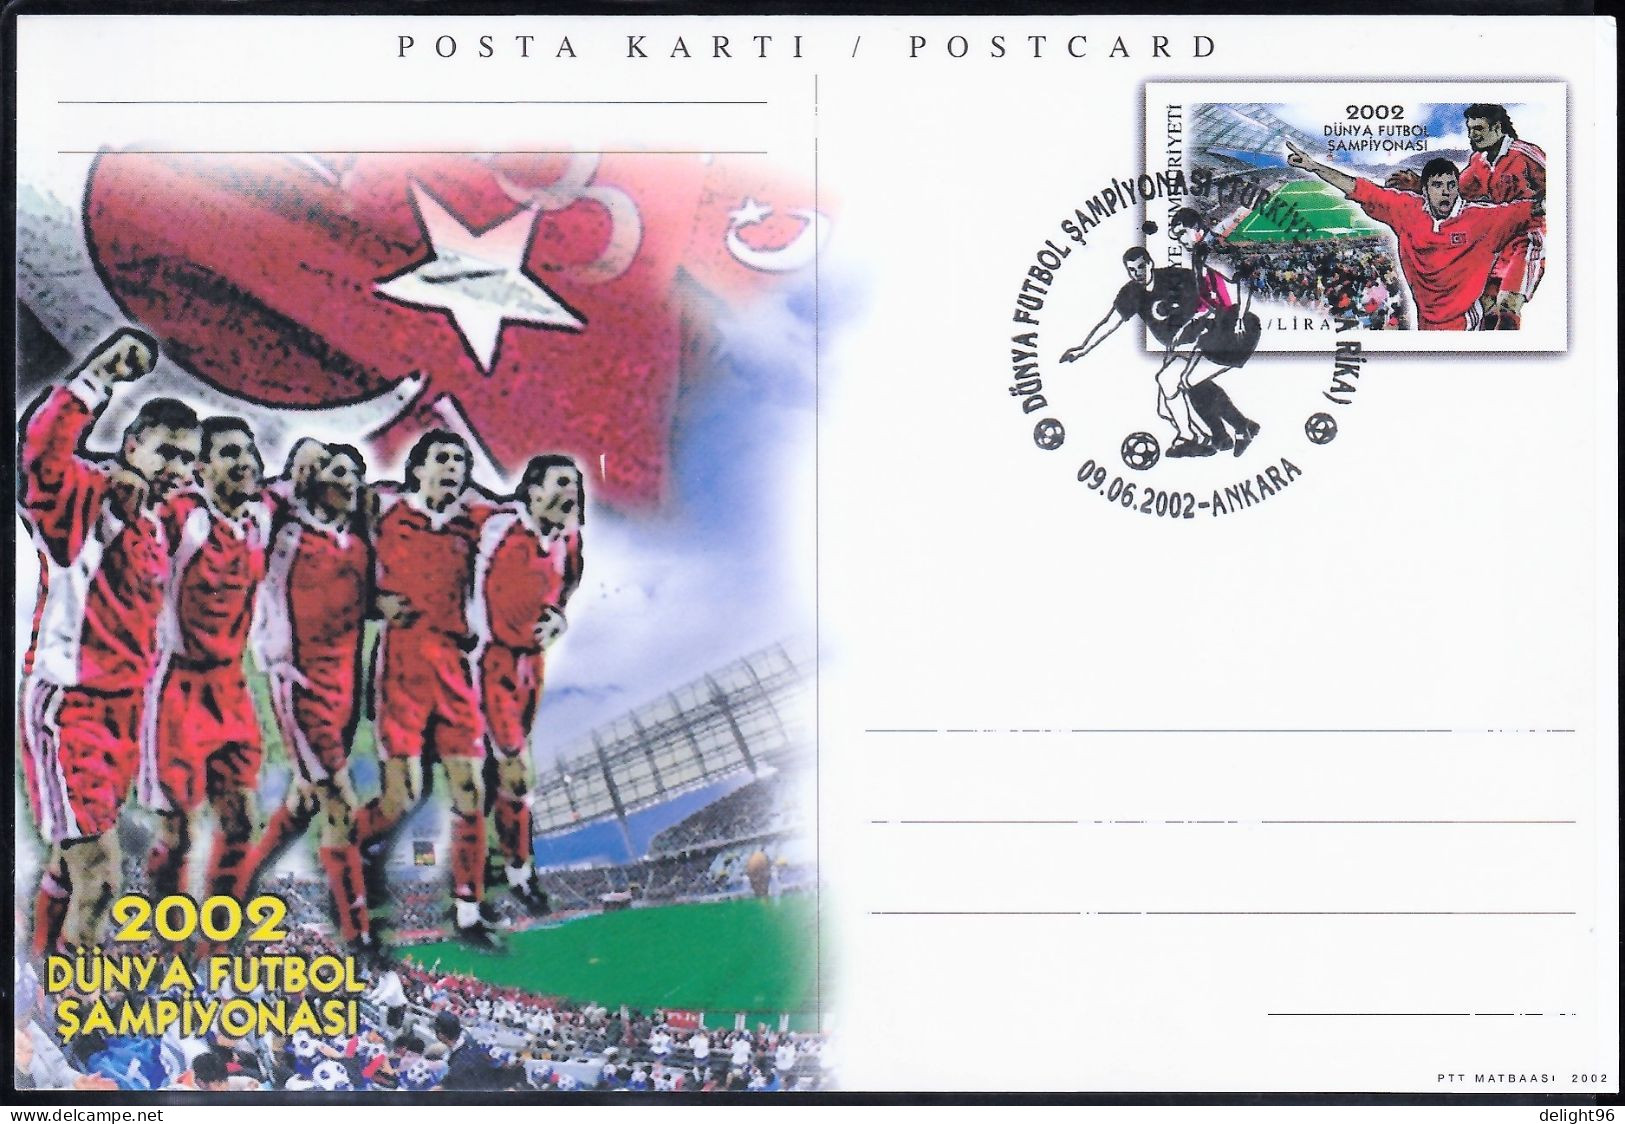 2002 Turkey Group Stage Match Vs. Costa Rica At FIFA World Cup In South Korea-Japan Commemorative Cancellation On PSC - 2002 – South Korea / Japan